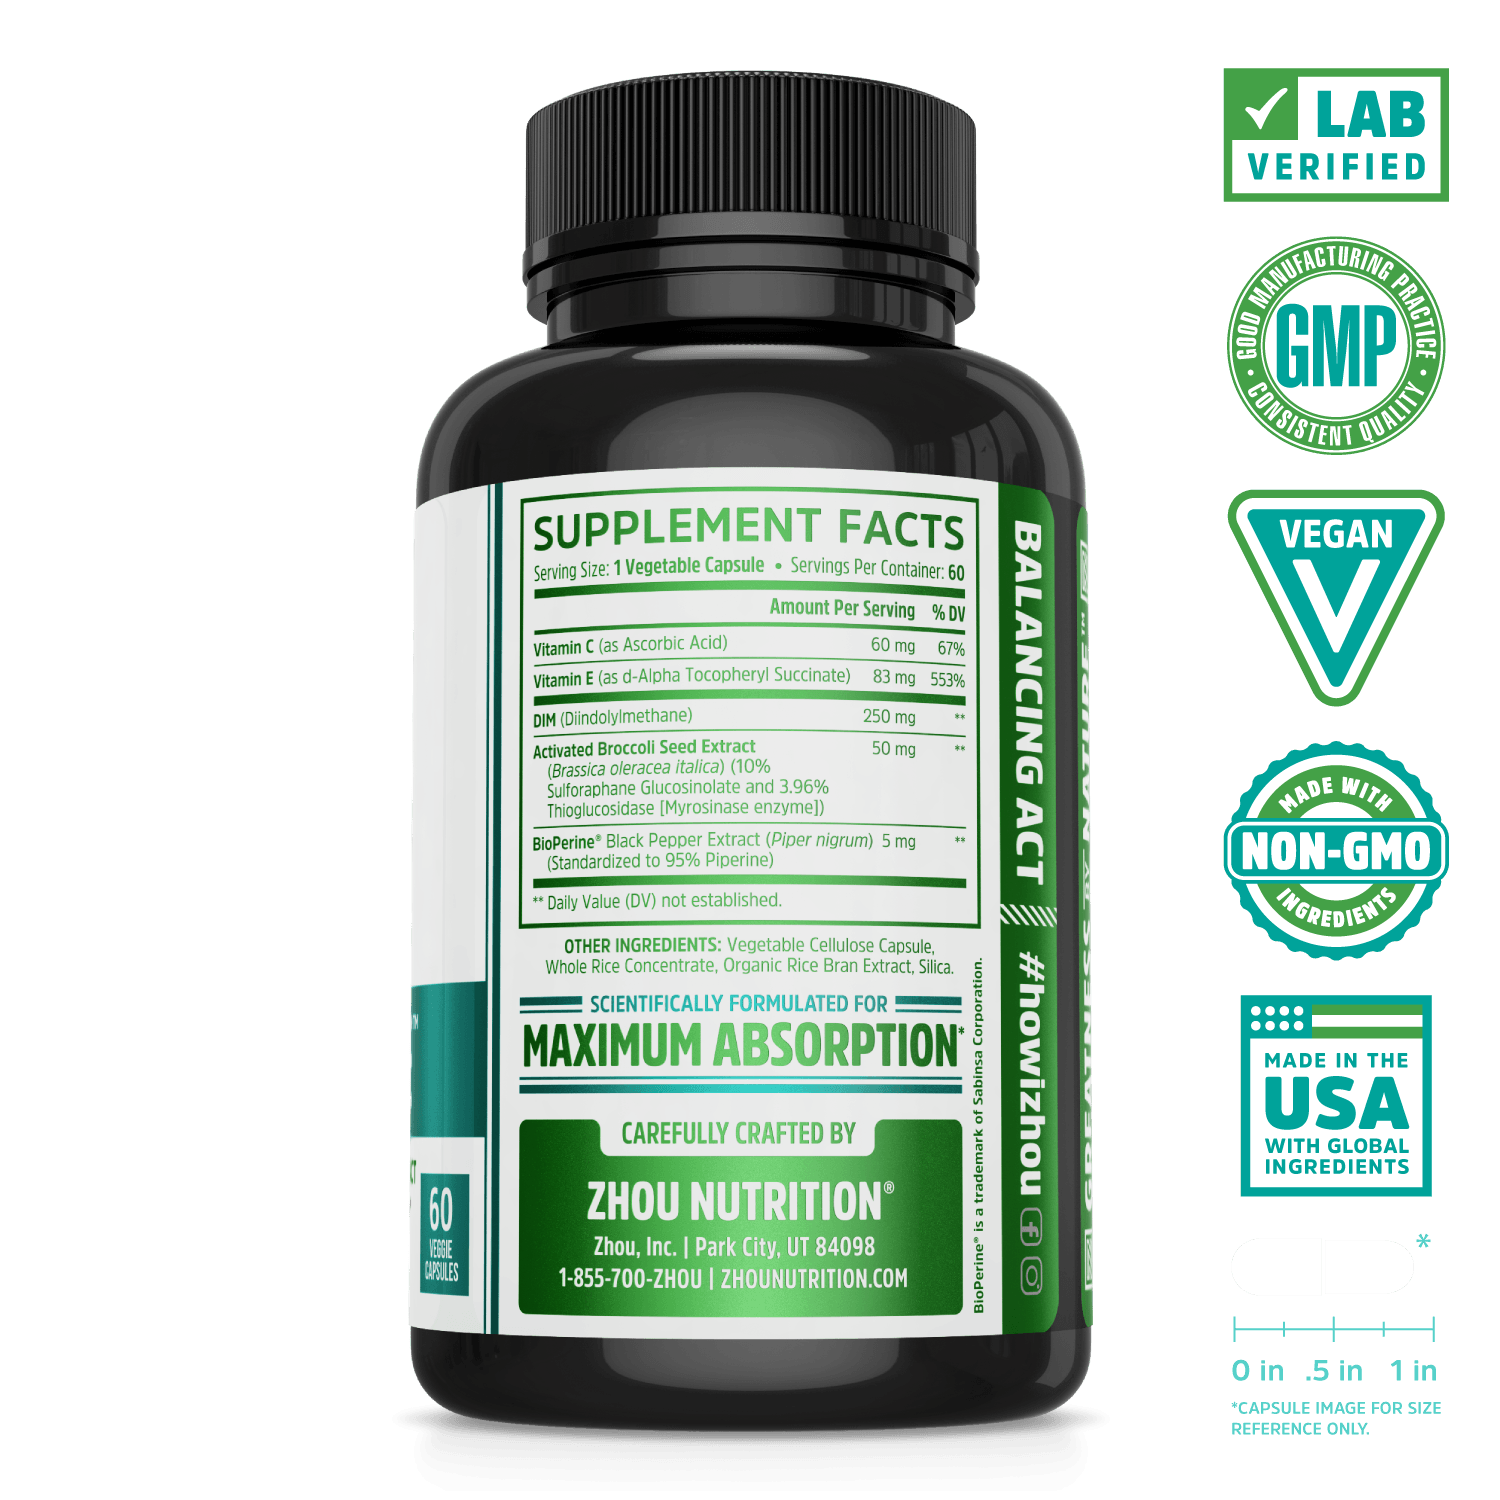 Zhou Nutrition DIM Active Hormone Balance Support for Women and Men. Bottle side. Lab verified, good manufacturing practices, vegan, made with non-GMO ingredients, made in the USA with global ingredients.